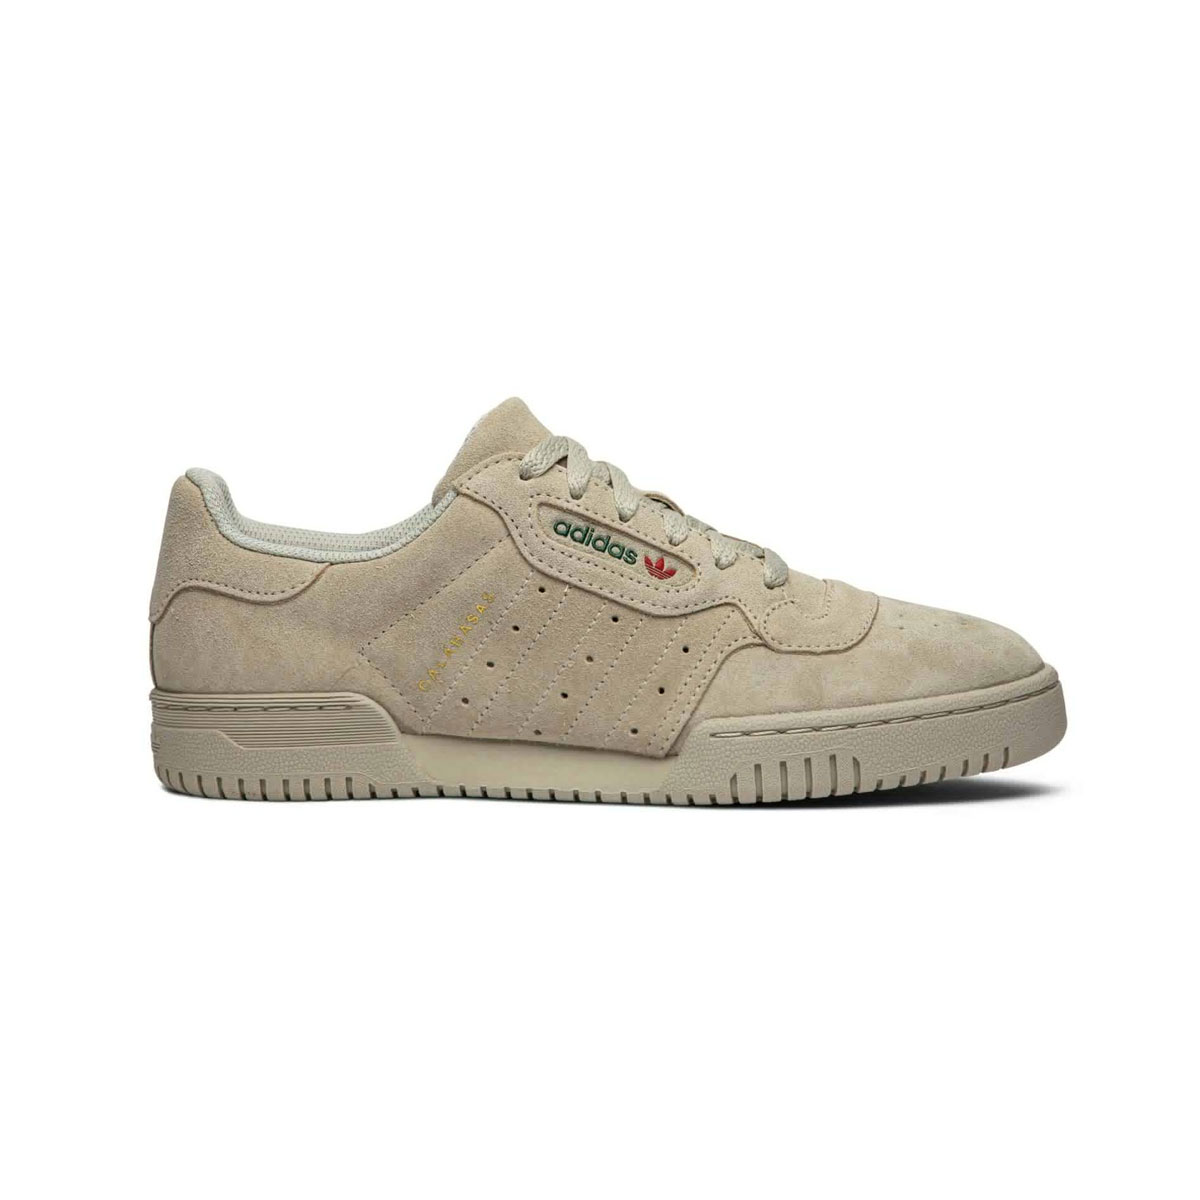 yeezy powerphase clear brown